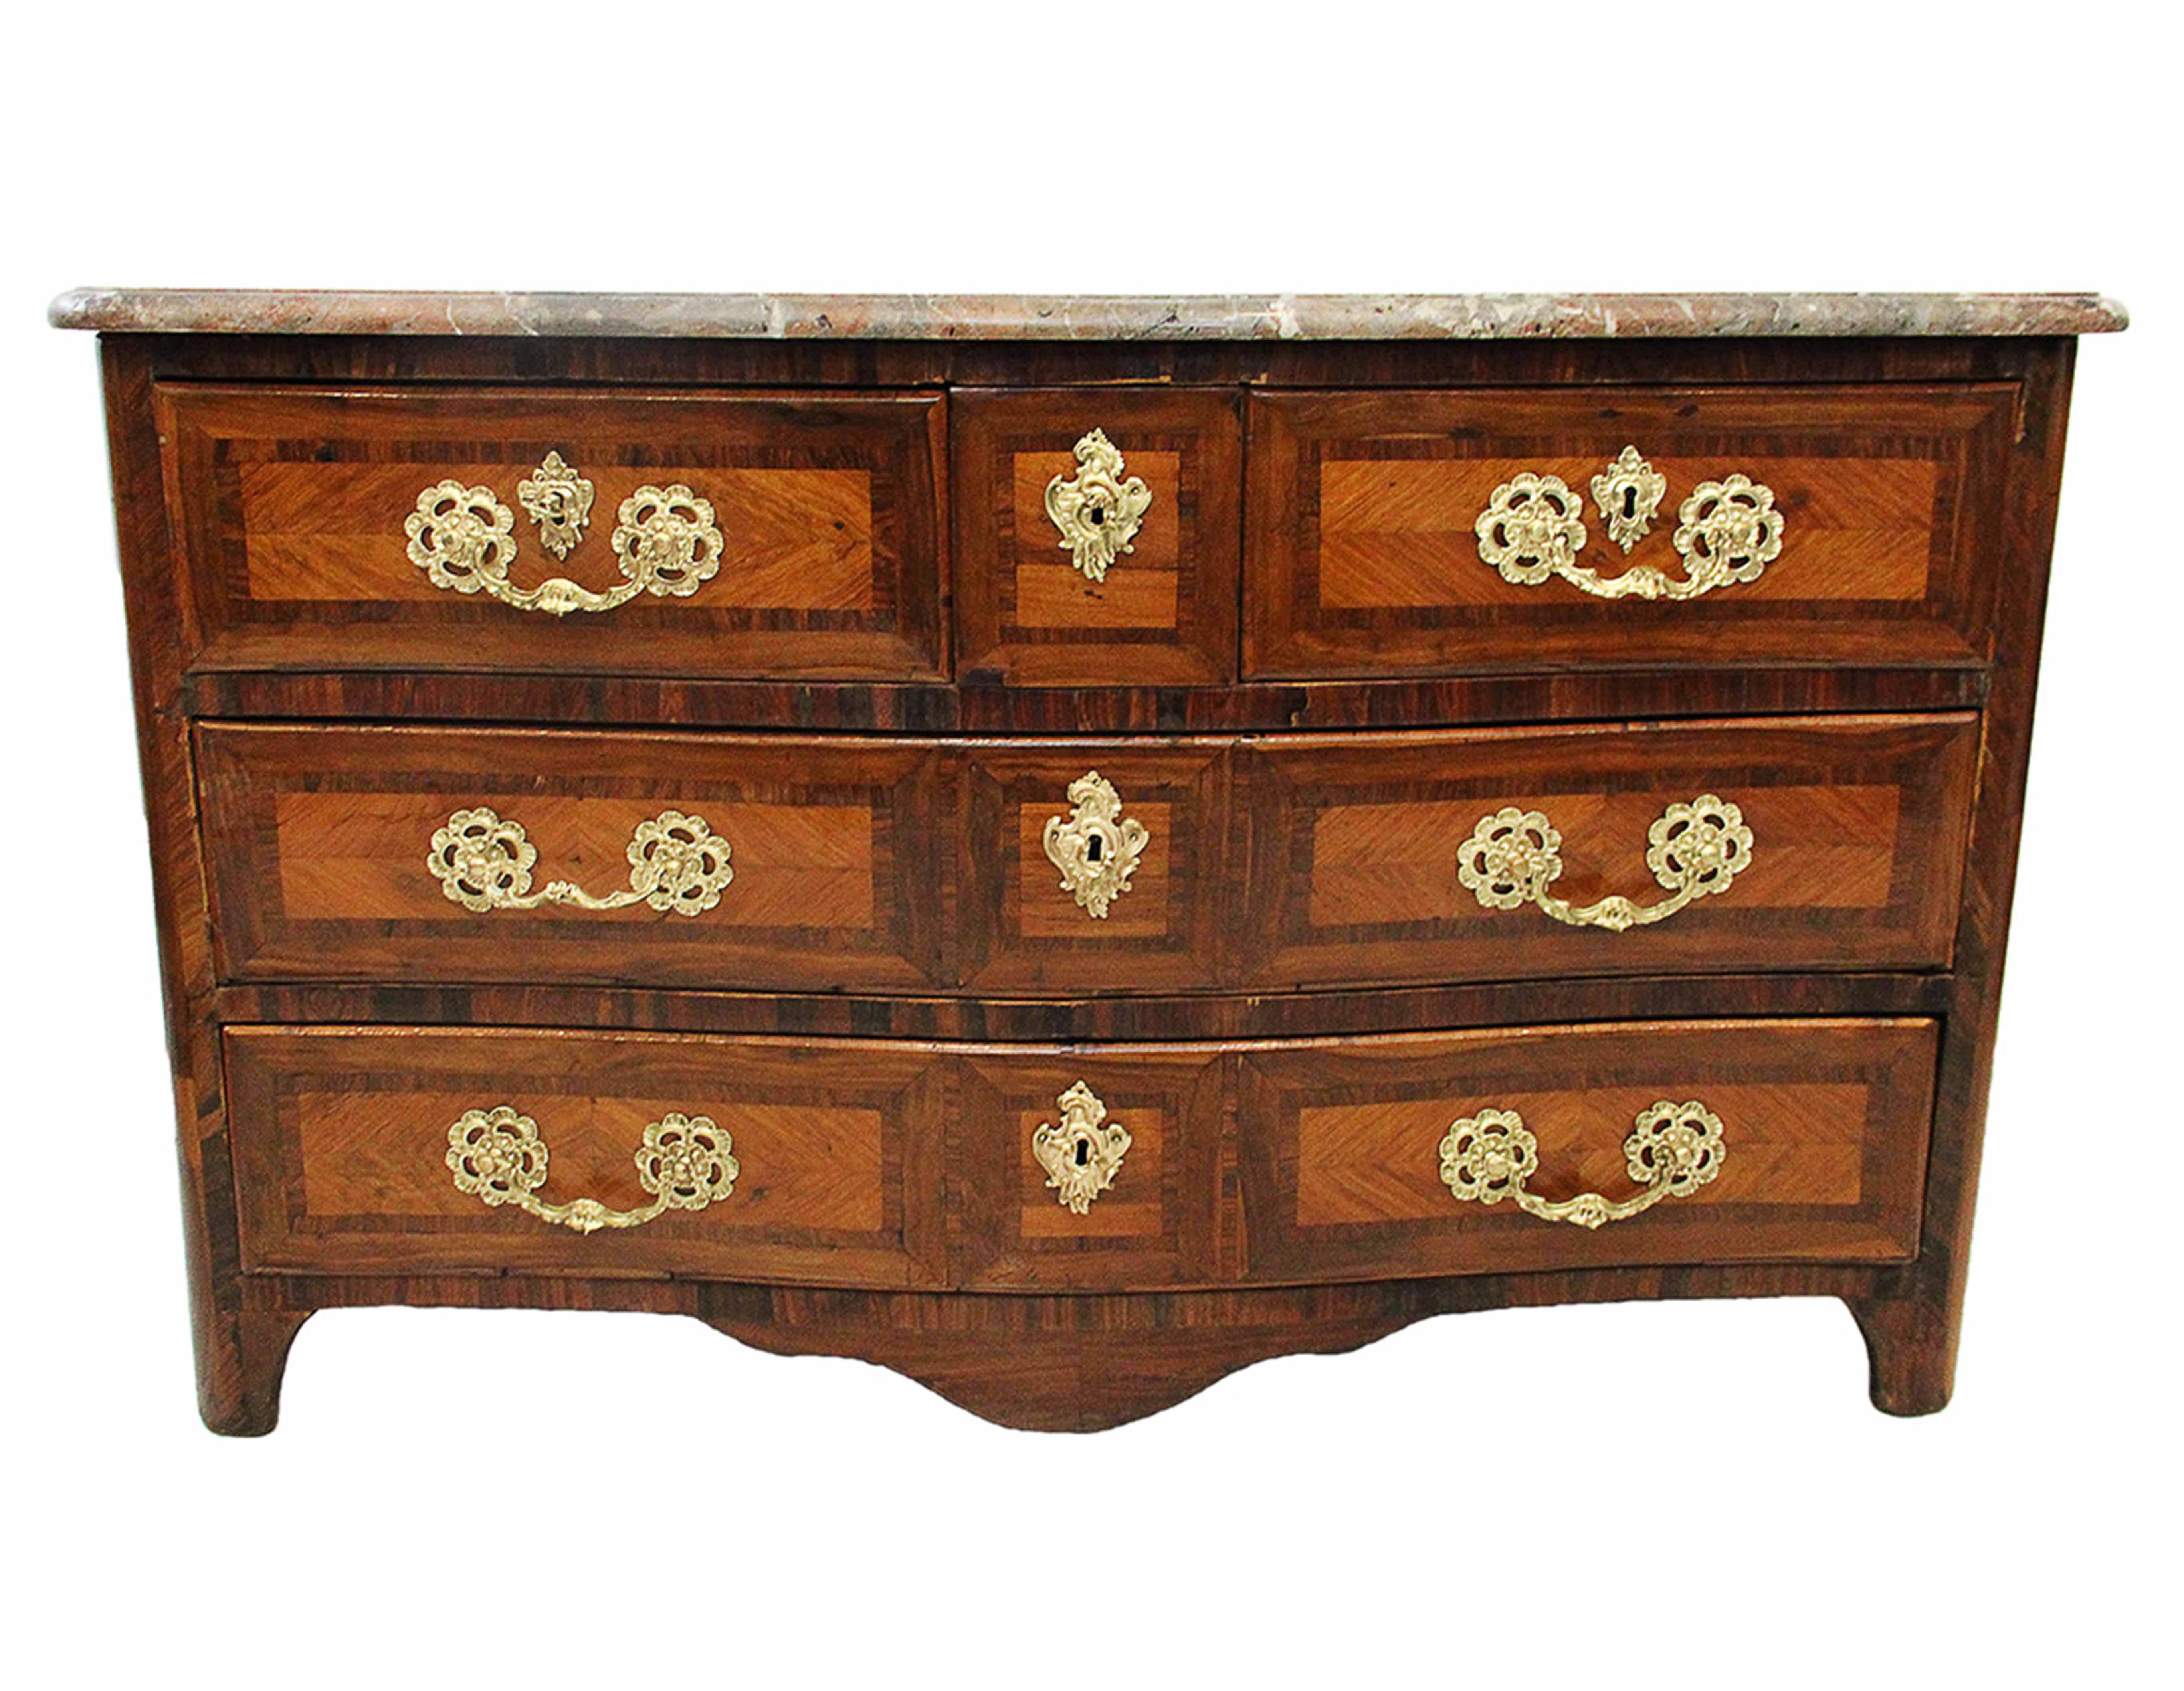 18th Century Commode Stamp Charles Chevallier Marble Top and Bronze Ornaments For Sale 2